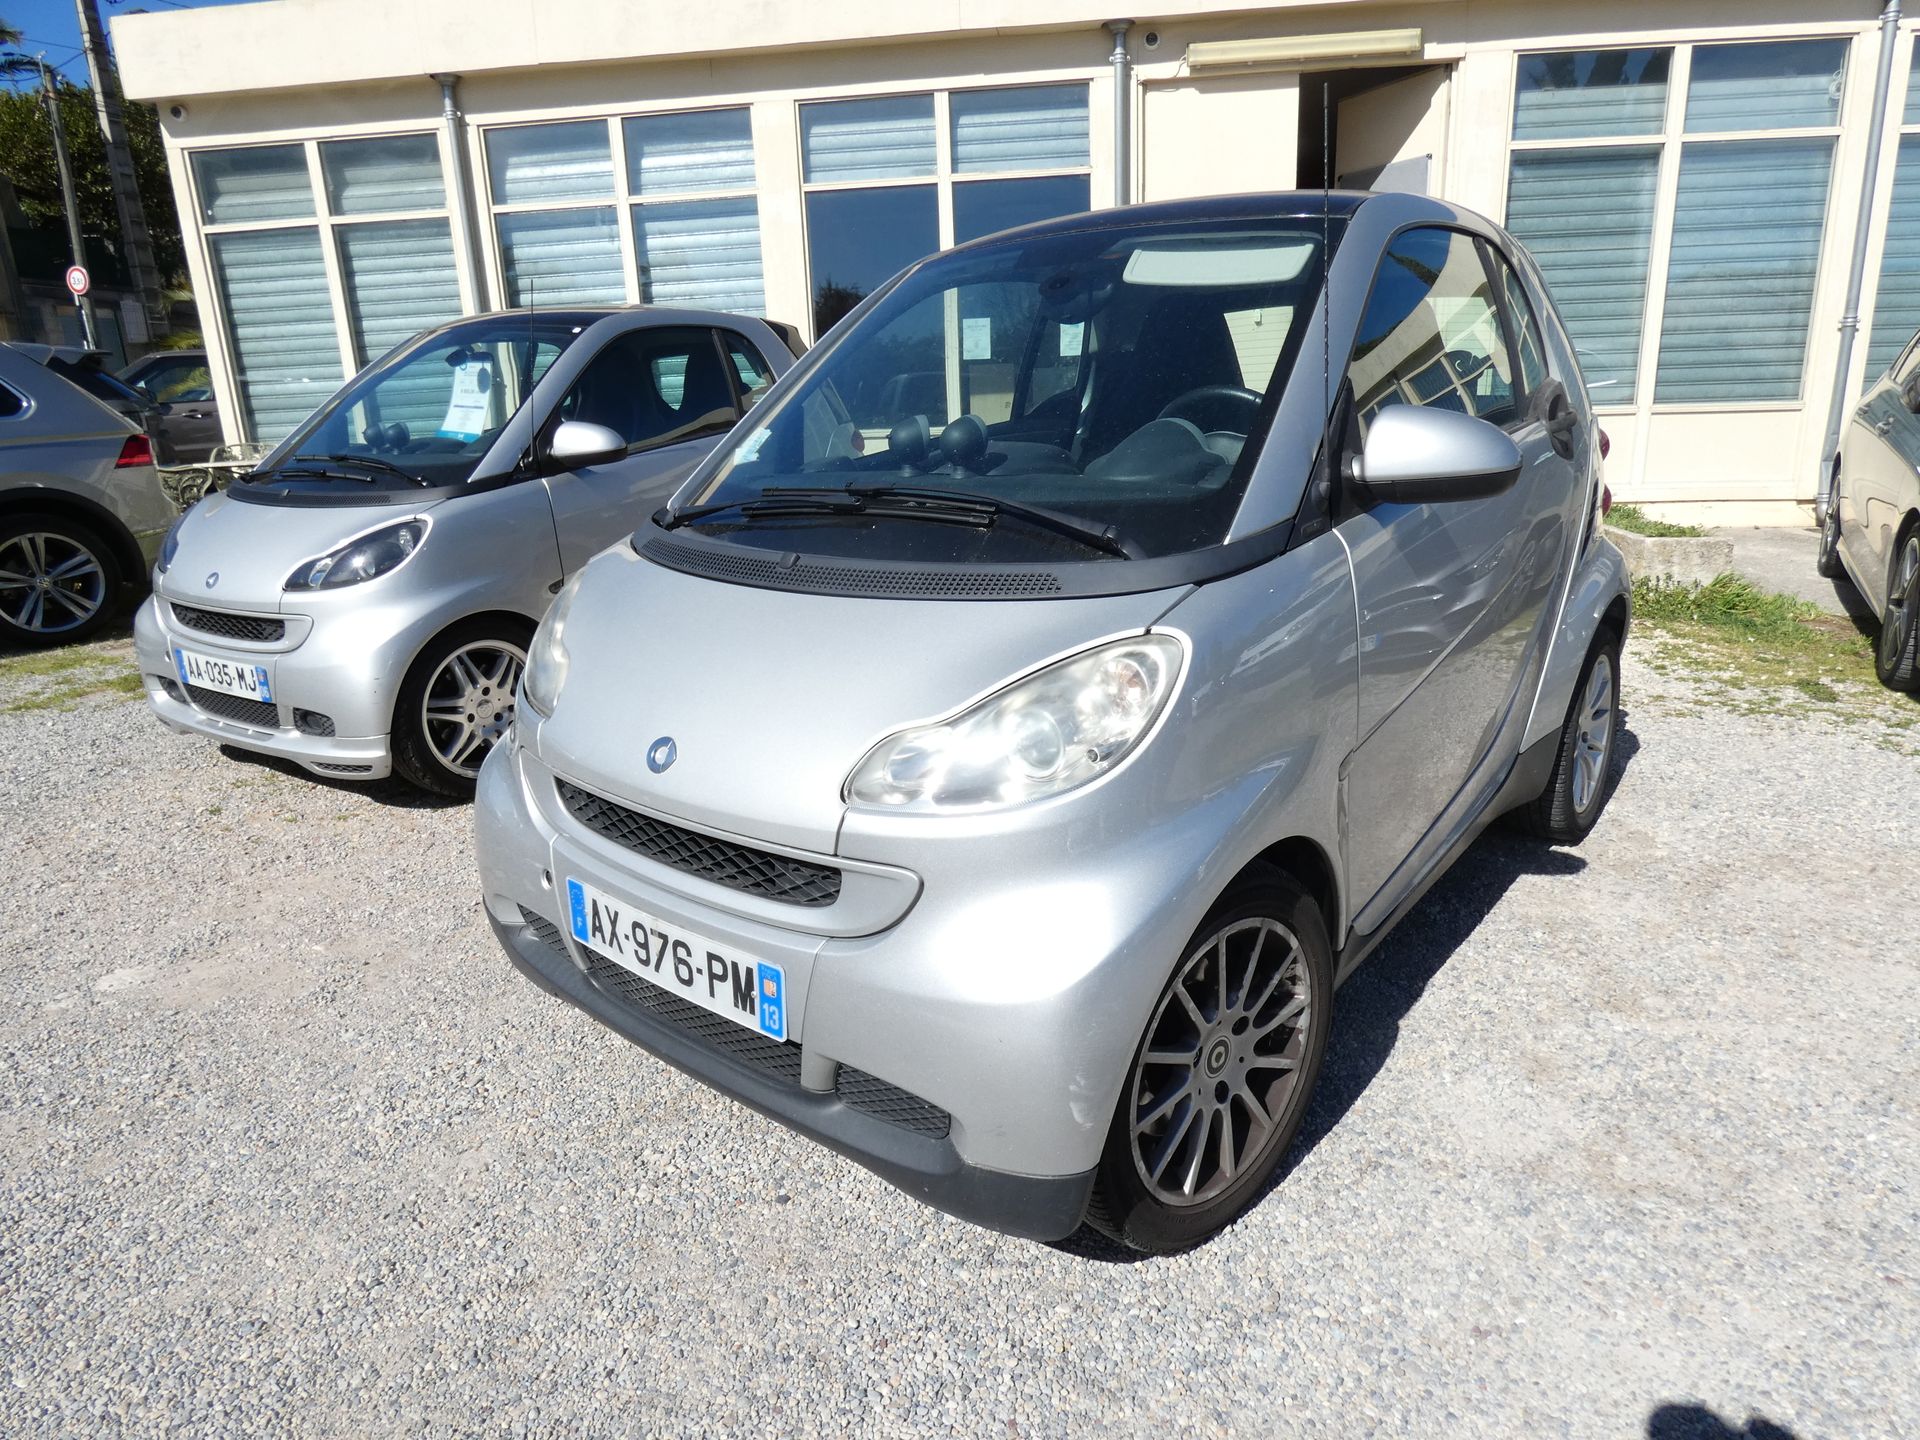 Null 1 SMART FORTWO GREY AX-976-PM FROM 19/02/2009 WITH 104843 KMS ON THE ODOMET&hellip;